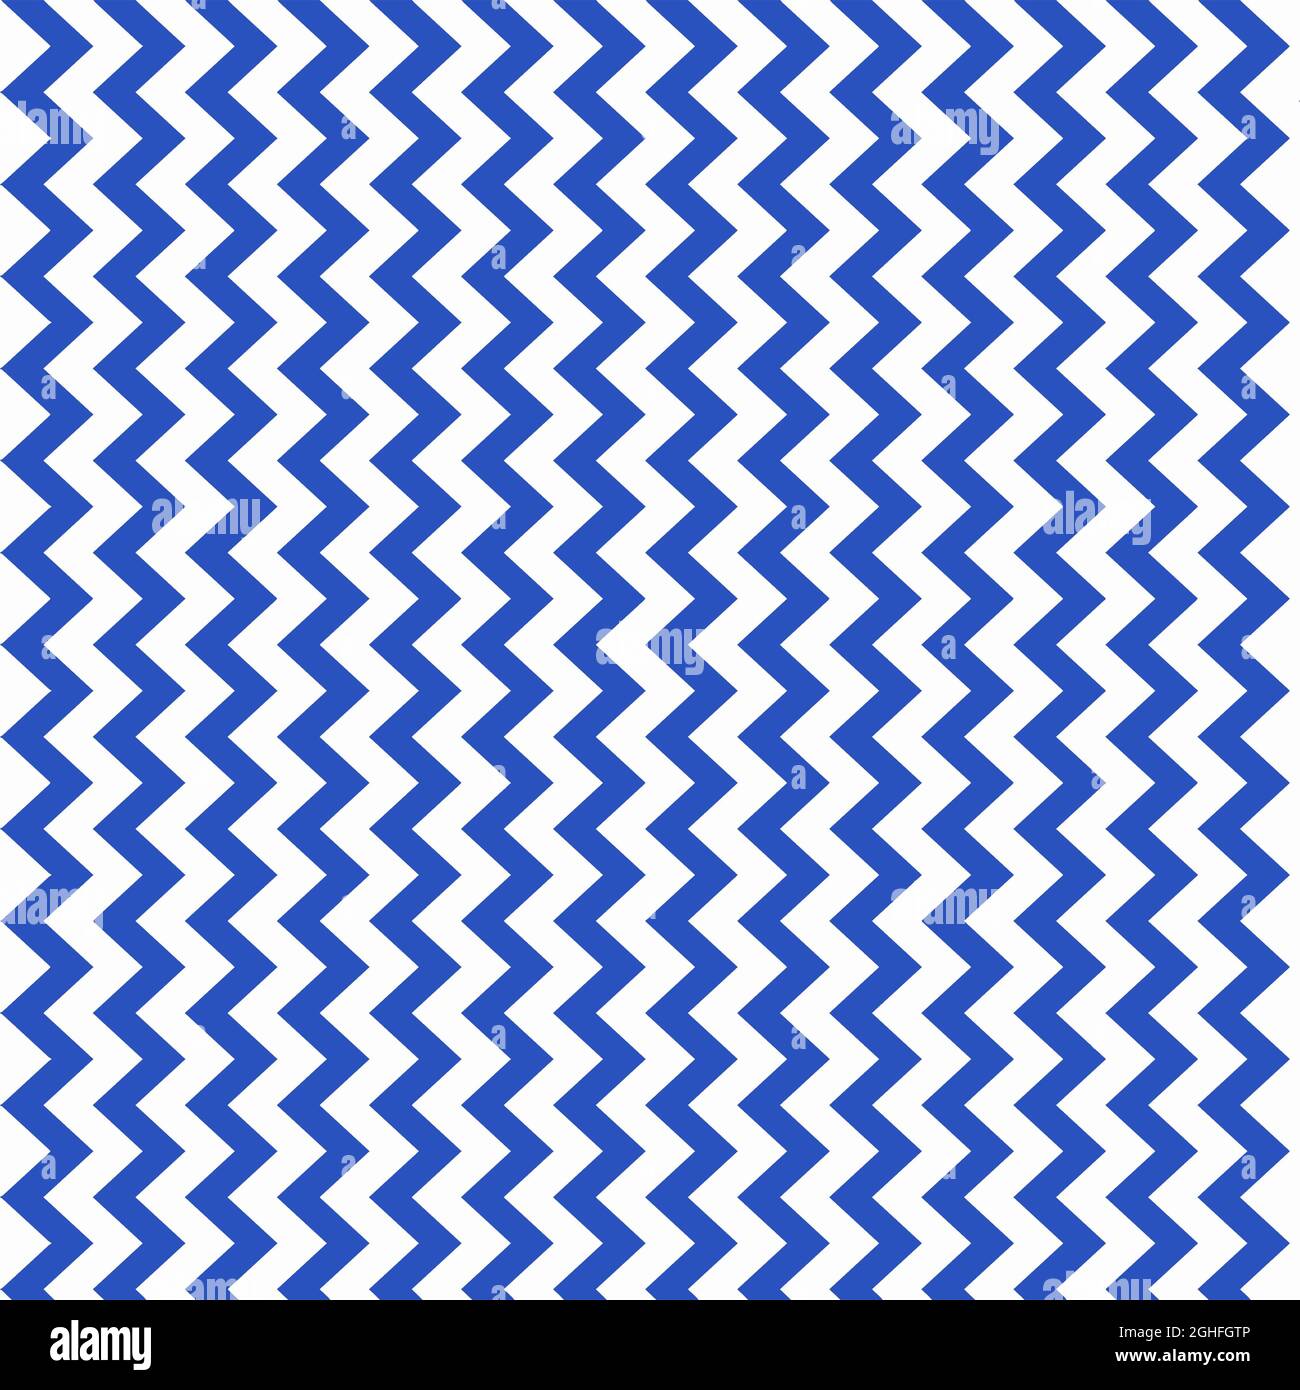 Cerulean blue and white chevron pattern in vertical zigzags in 12x12 design element for backgrounds and projects. Stock Photo